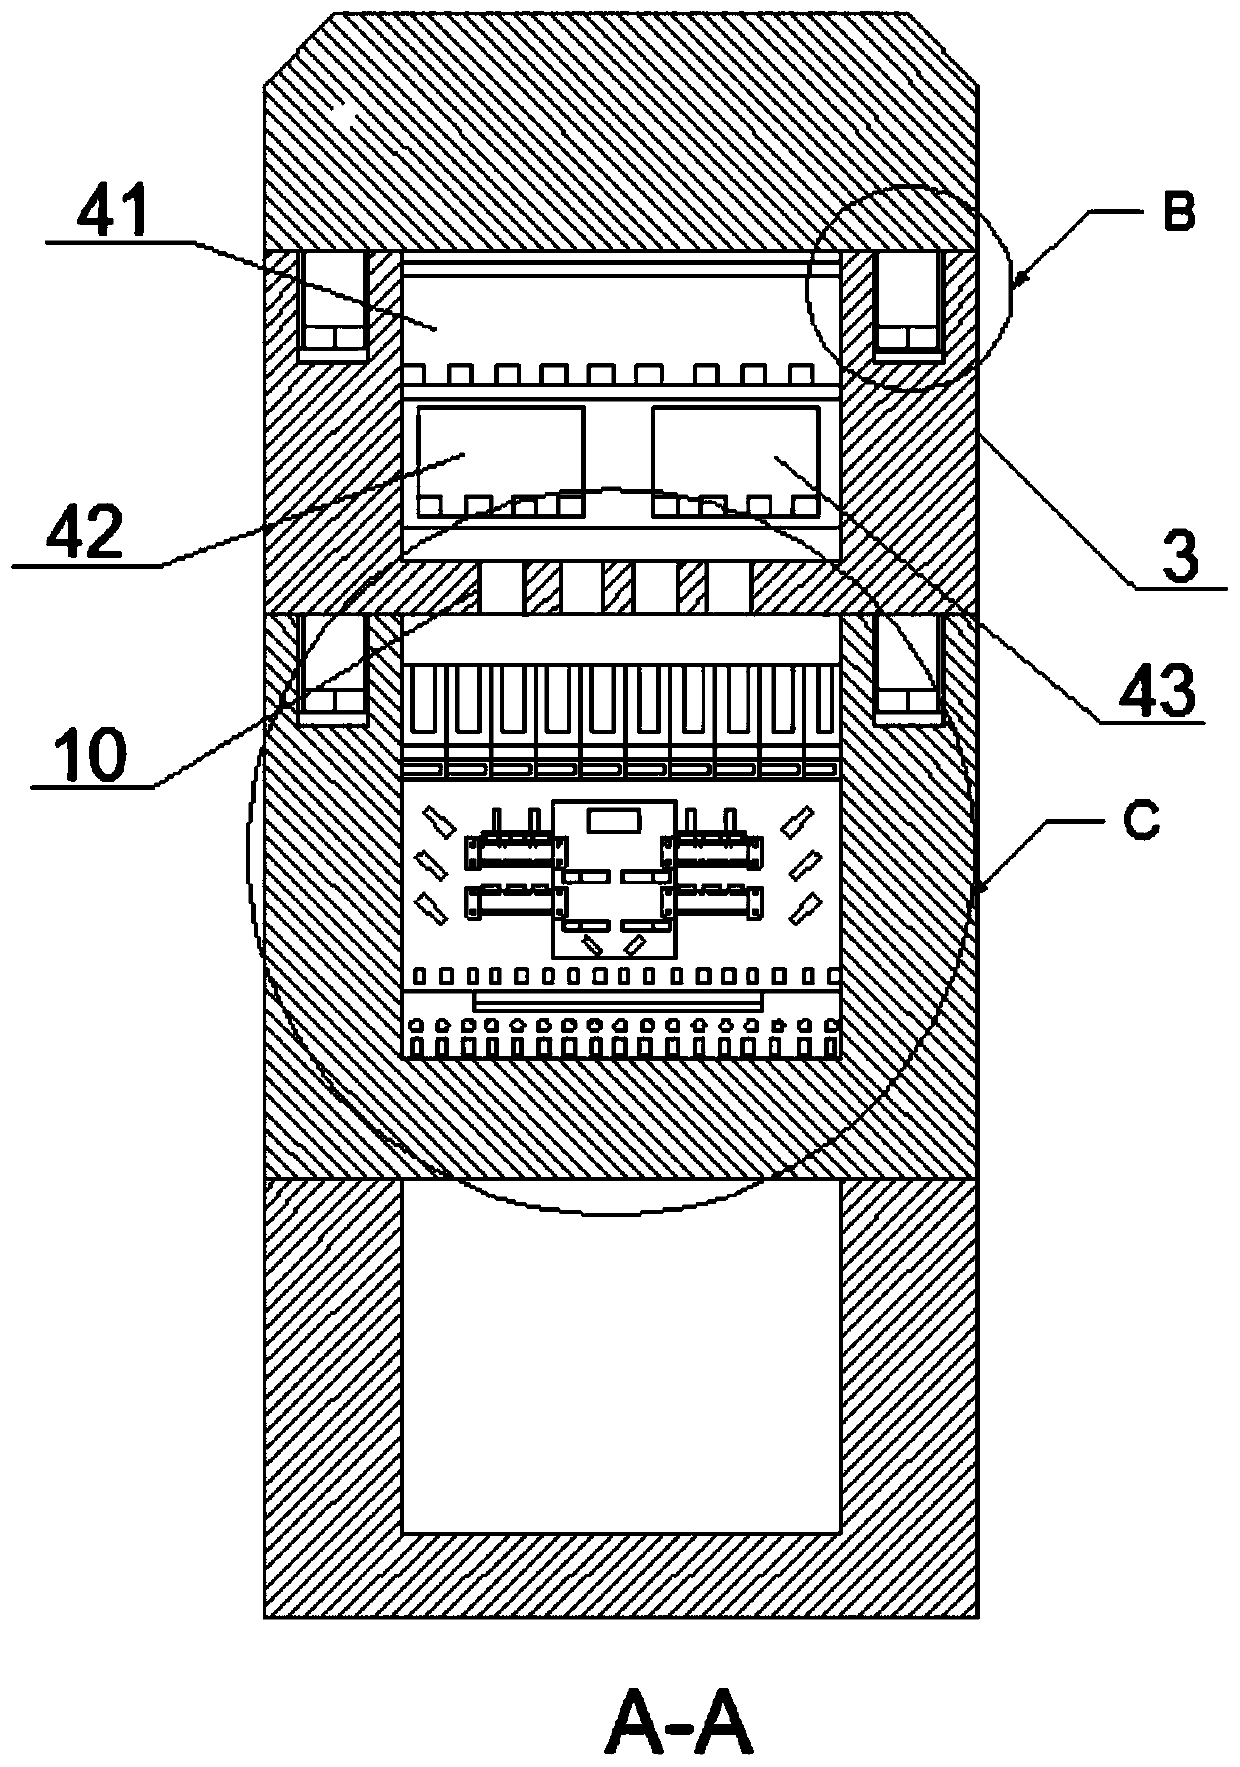 Large-capacity optical cable cross-connecting cabinet capable of longitudinally expanding without disassembling